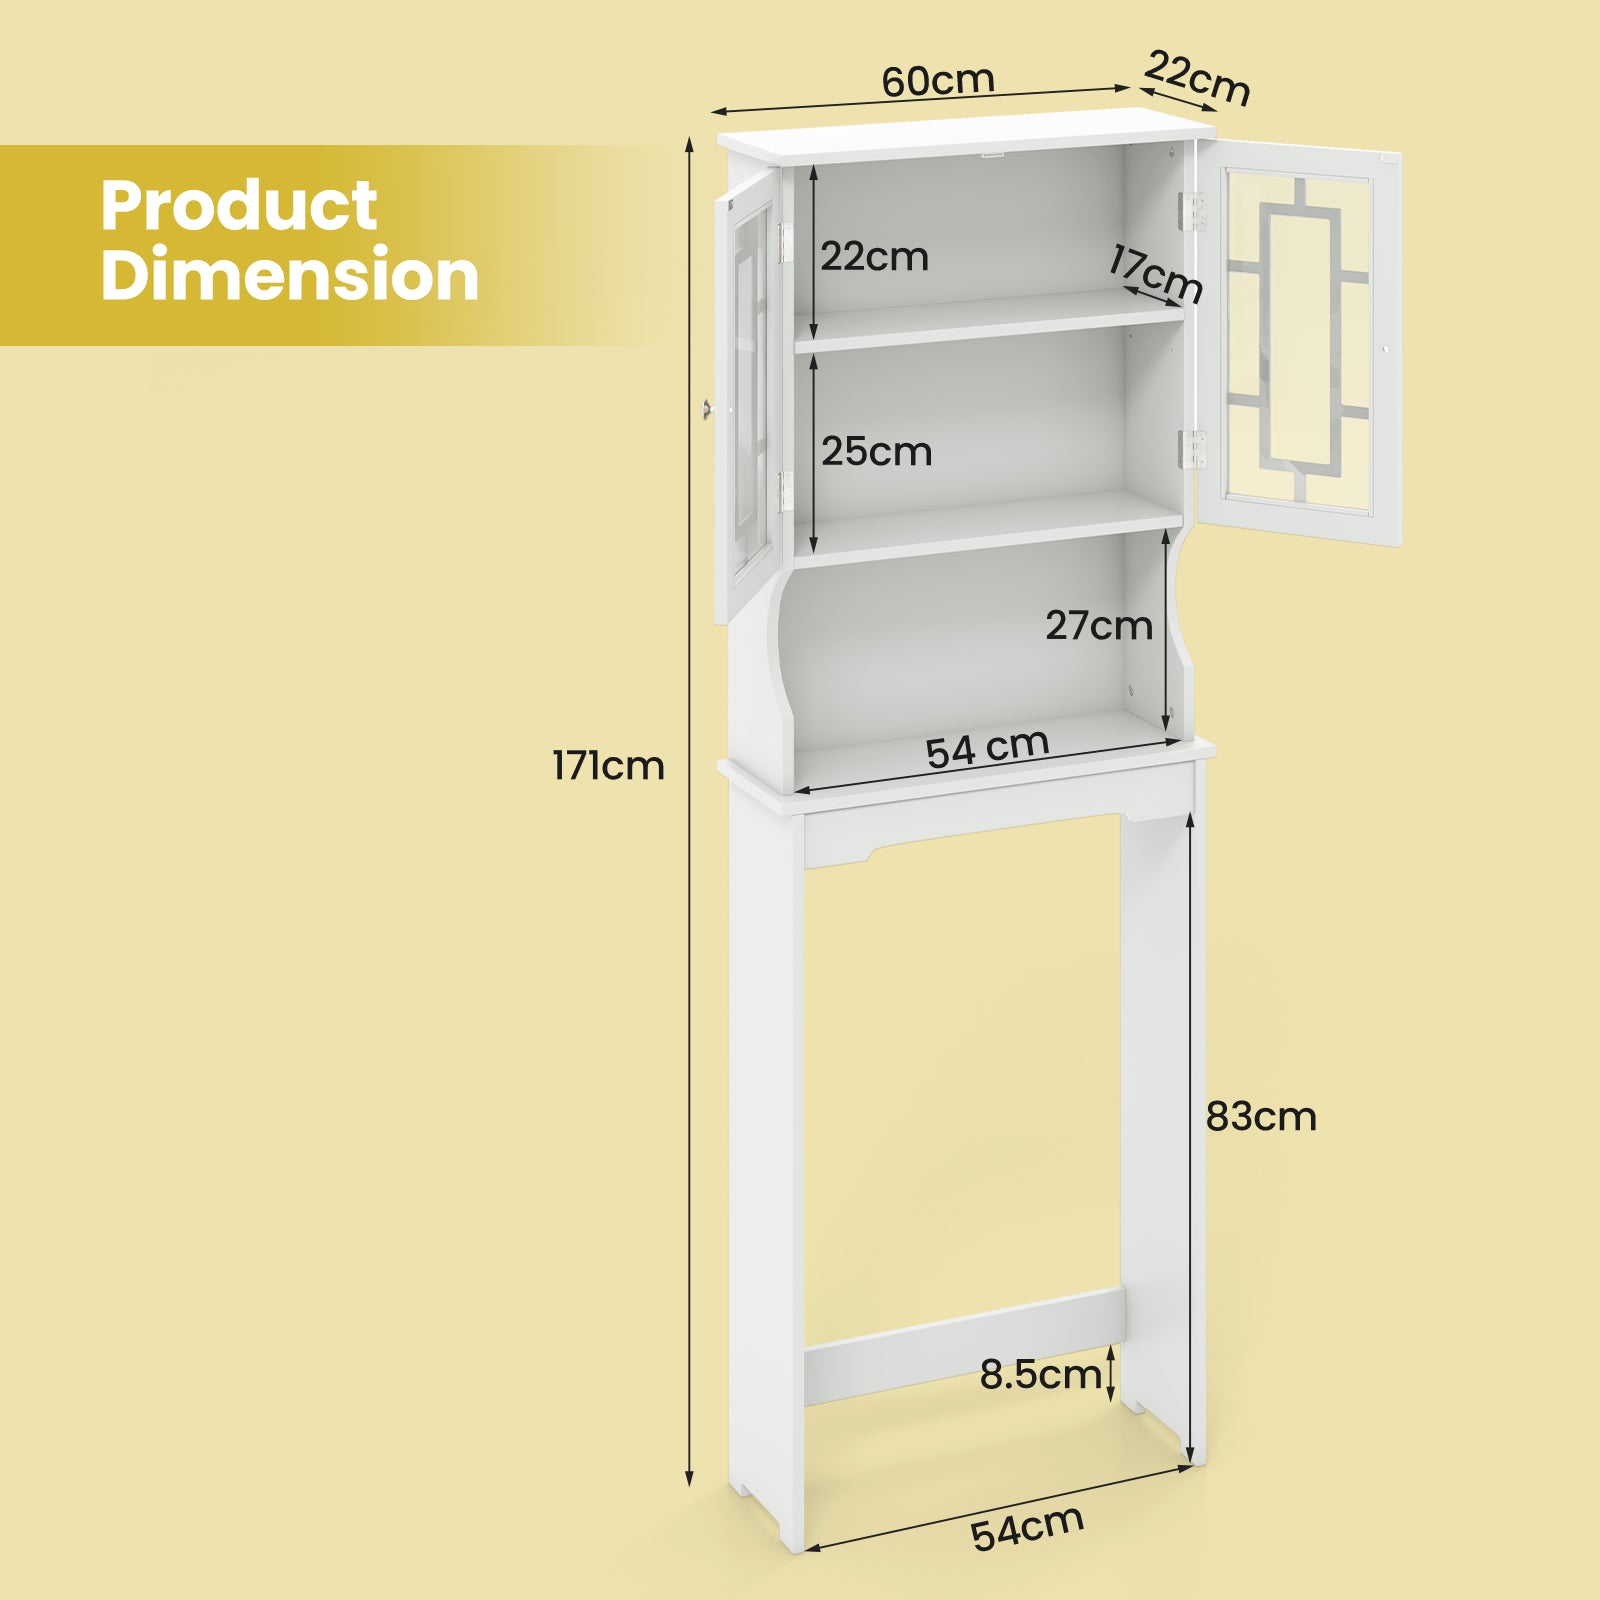 Over-the-Toilet Storage Cabinet with Inner Adjustable Shelf-White